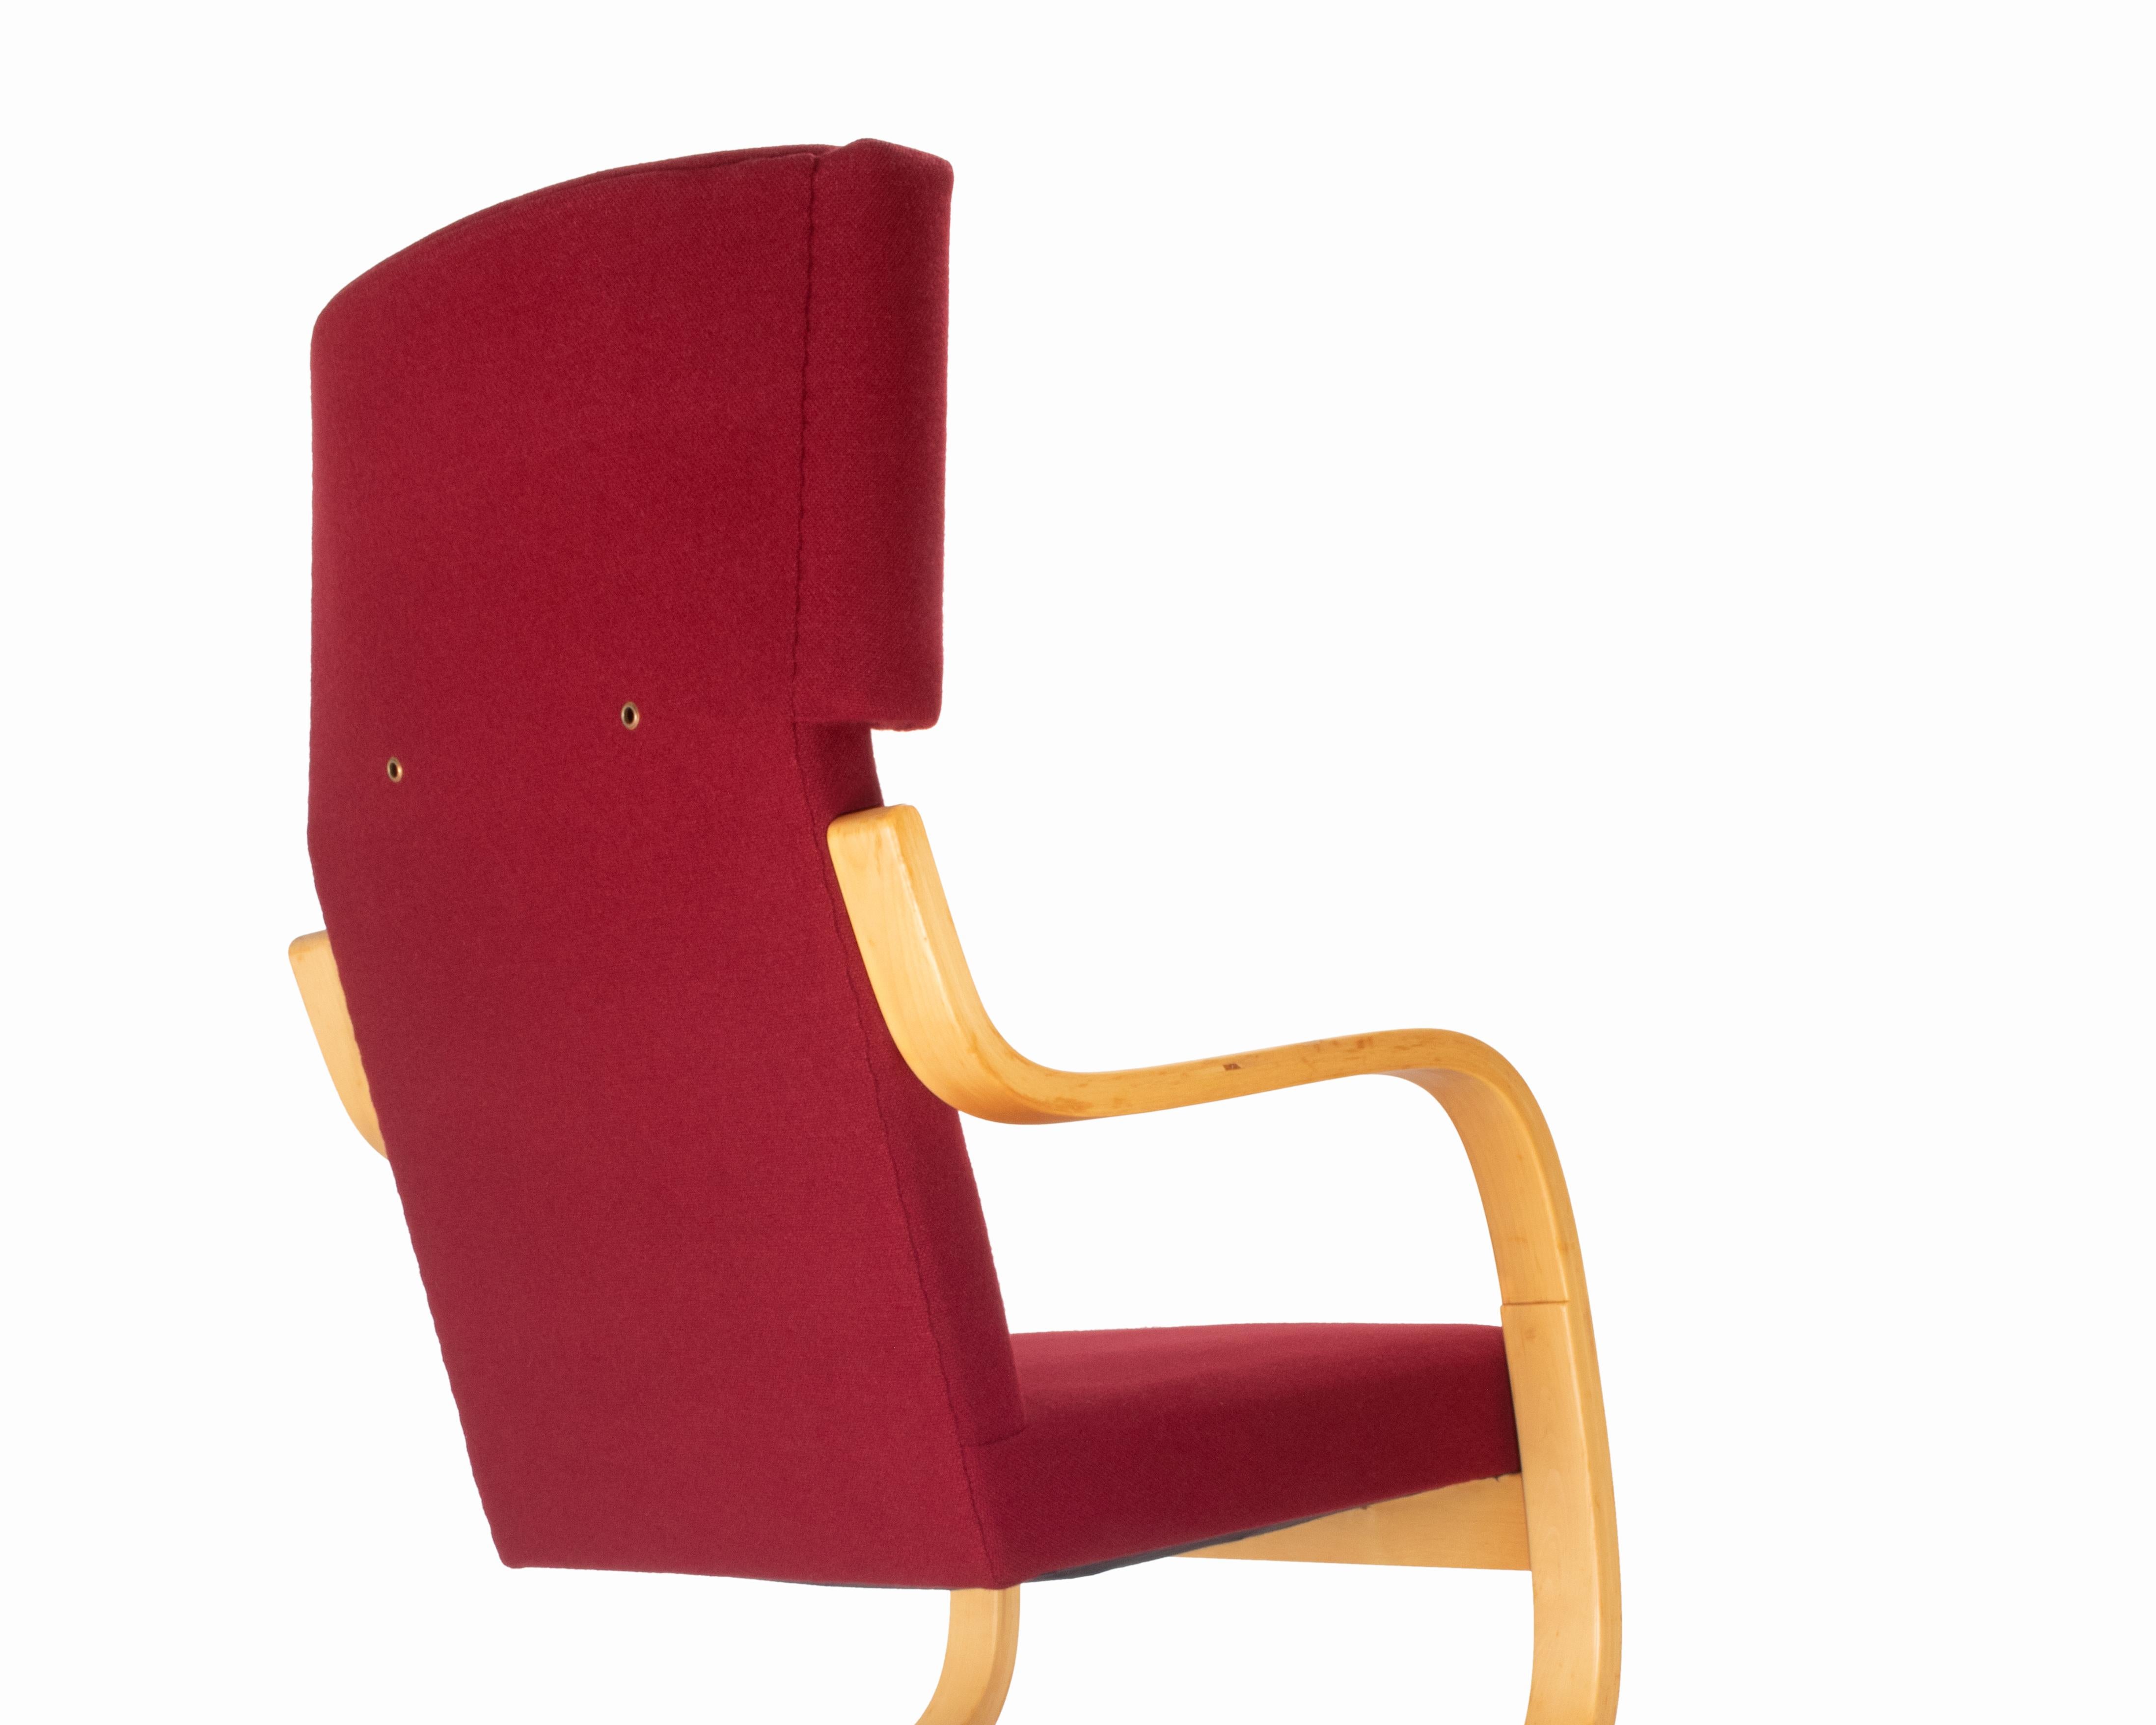 20th Century Vintage Mid-Century Model 36/401 Cantilever Lounge Chairs by Alvar Aalto, a Pair